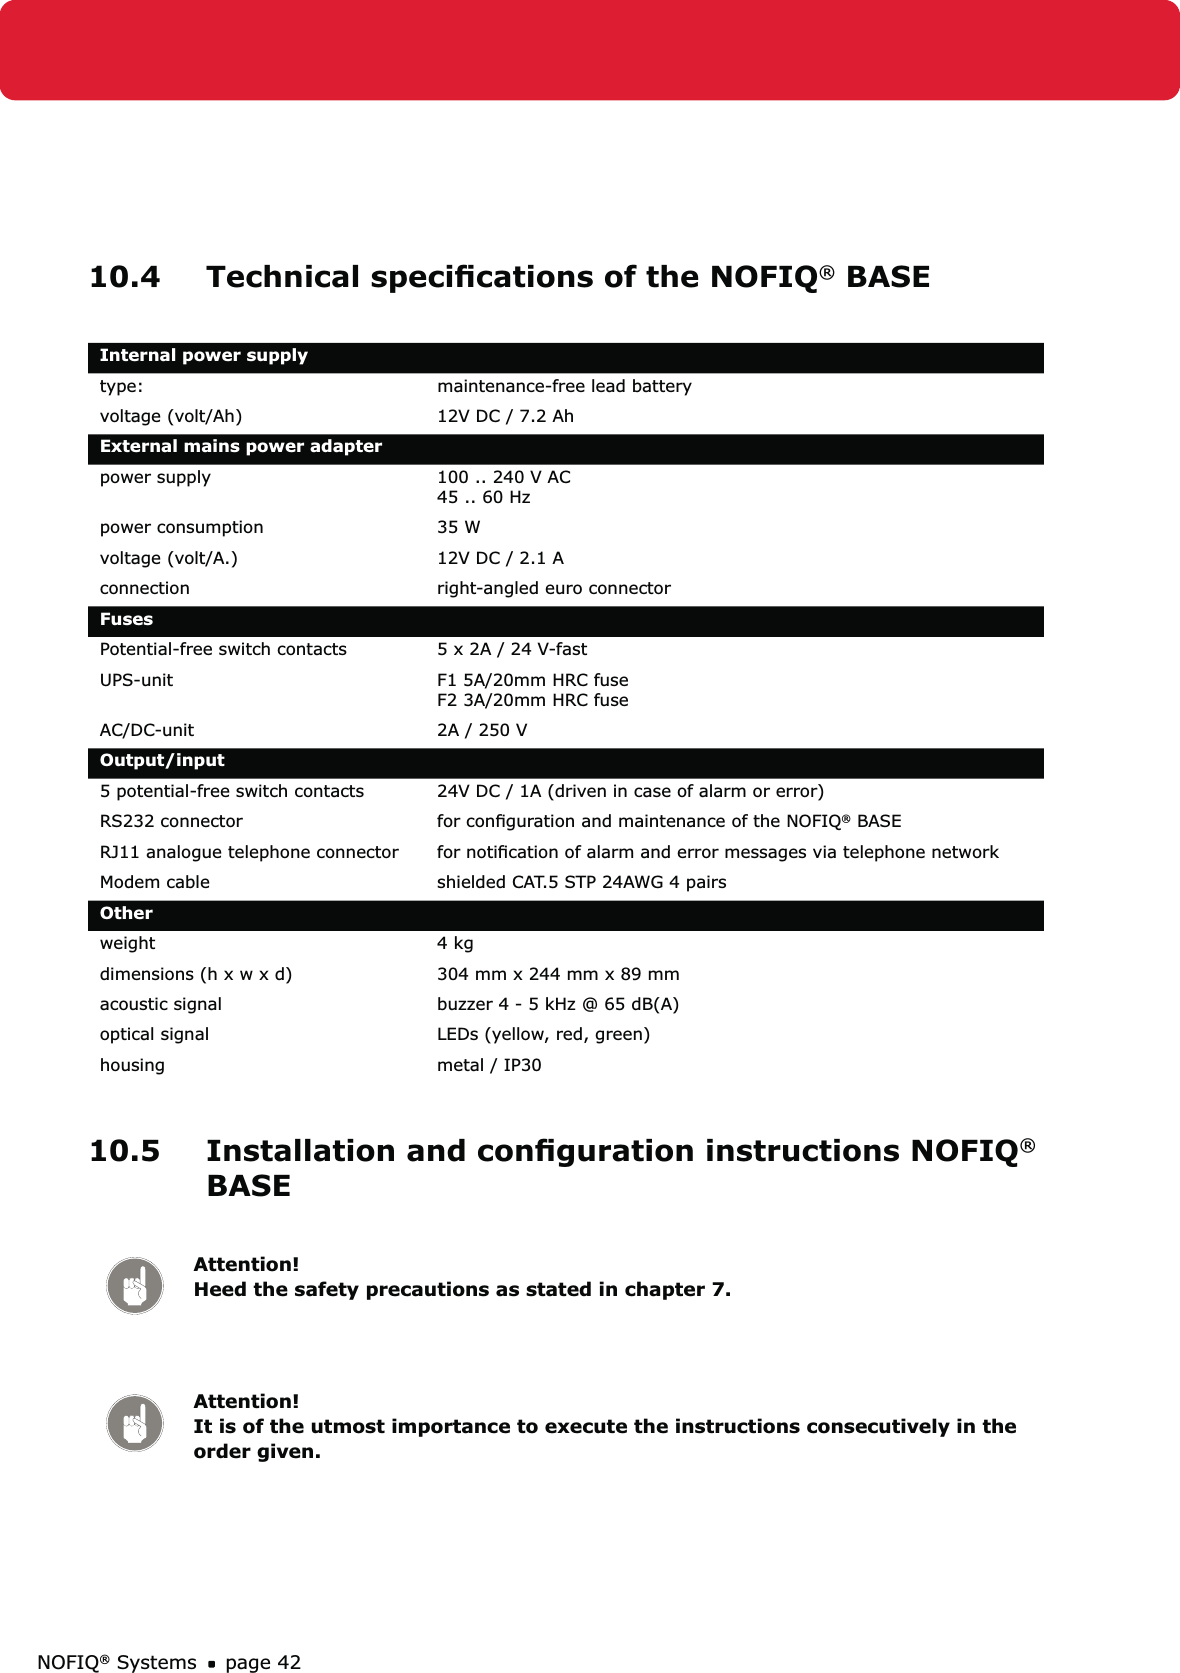 NOFIQ® Systems page 4210.4  Technical speciﬁcations of the NOFIQ® BASE Internal power supplytype: maintenance-free lead batteryvoltage (volt/Ah) 12V DC / 7.2 AhExternal mains power adapter power supply 100 .. 240 V AC 45 .. 60 Hzpower consumption 35 Wvoltage (volt/A.) 12V DC / 2.1 Aconnection right-angled euro connector FusesPotential-free switch contacts 5 x 2A / 24 V-fastUPS-unit F1 5A/20mm HRC fuse F2 3A/20mm HRC fuseAC/DC-unit 2A / 250 VOutput/input5 potential-free switch contacts 24V DC / 1A (driven in case of alarm or error)RS232 connector for conﬁguration and maintenance of the NOFIQ® BASERJ11 analogue telephone connector for notiﬁcation of alarm and error messages via telephone networkModem cable shielded CAT.5 STP 24AWG 4 pairsOtherweight 4 kgdimensions (h x w x d) 304 mm x 244 mm x 89 mmacoustic signal  buzzer 4 - 5 kHz @ 65 dB(A)optical signal LEDs (yellow, red, green)housing metal / IP30 10.5  Installation and conﬁguration instructions NOFIQ® BASE Attention! Heed the safety precautions as stated in chapter 7.Attention! It is of the utmost importance to execute the instructions consecutively in the order given.